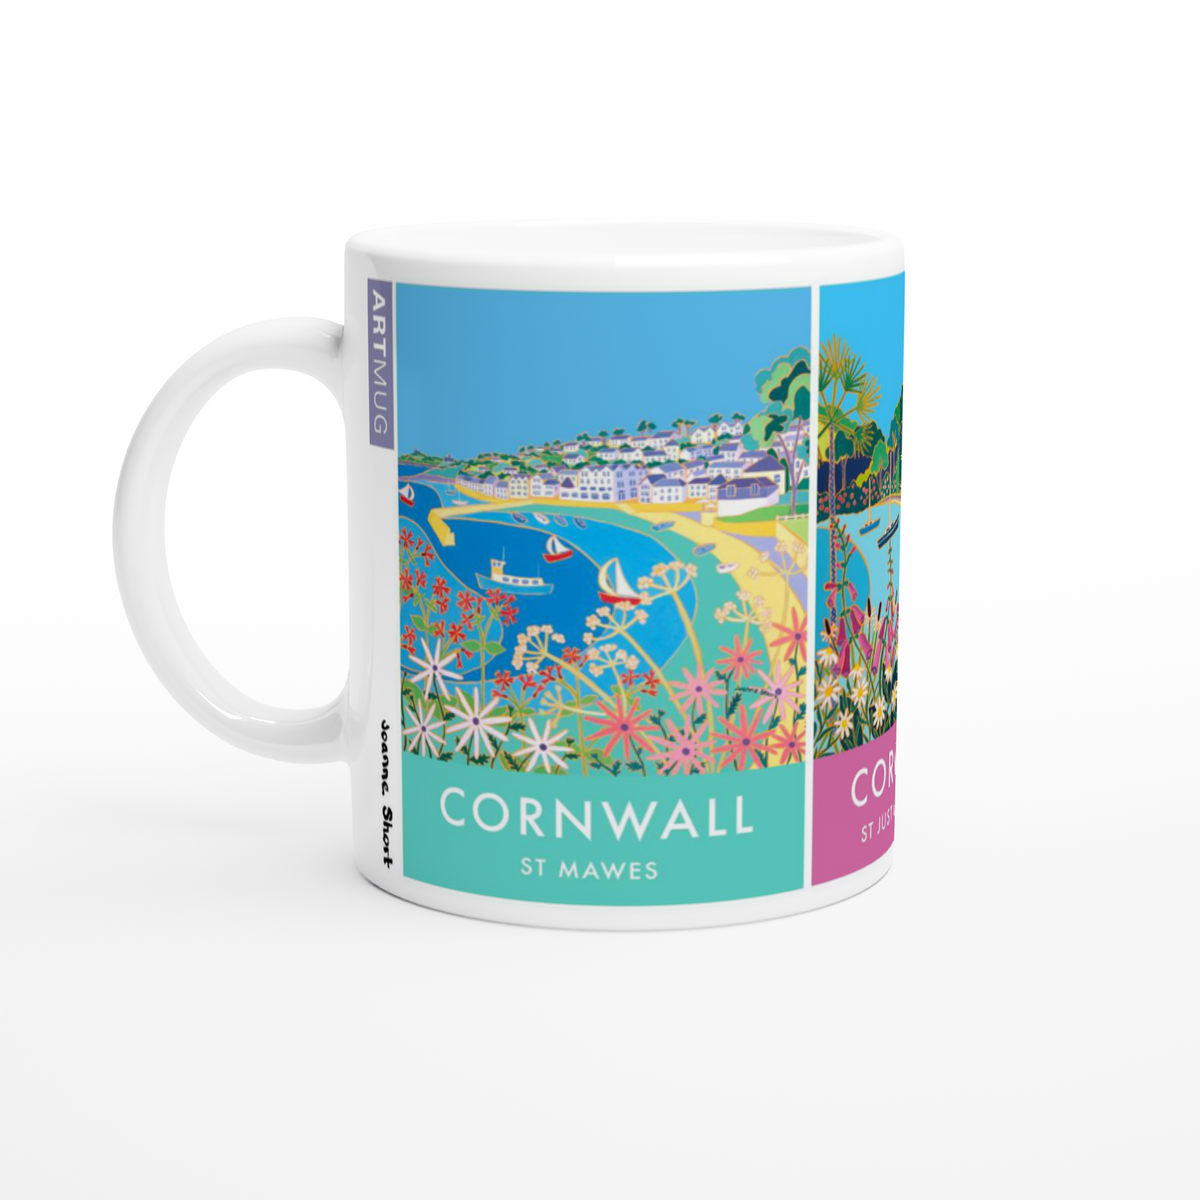 Cornish Art Mug featuring St Mawes, St Just in Roseland and St Anthony&#39;s Lighthouse by artist Joanne Short